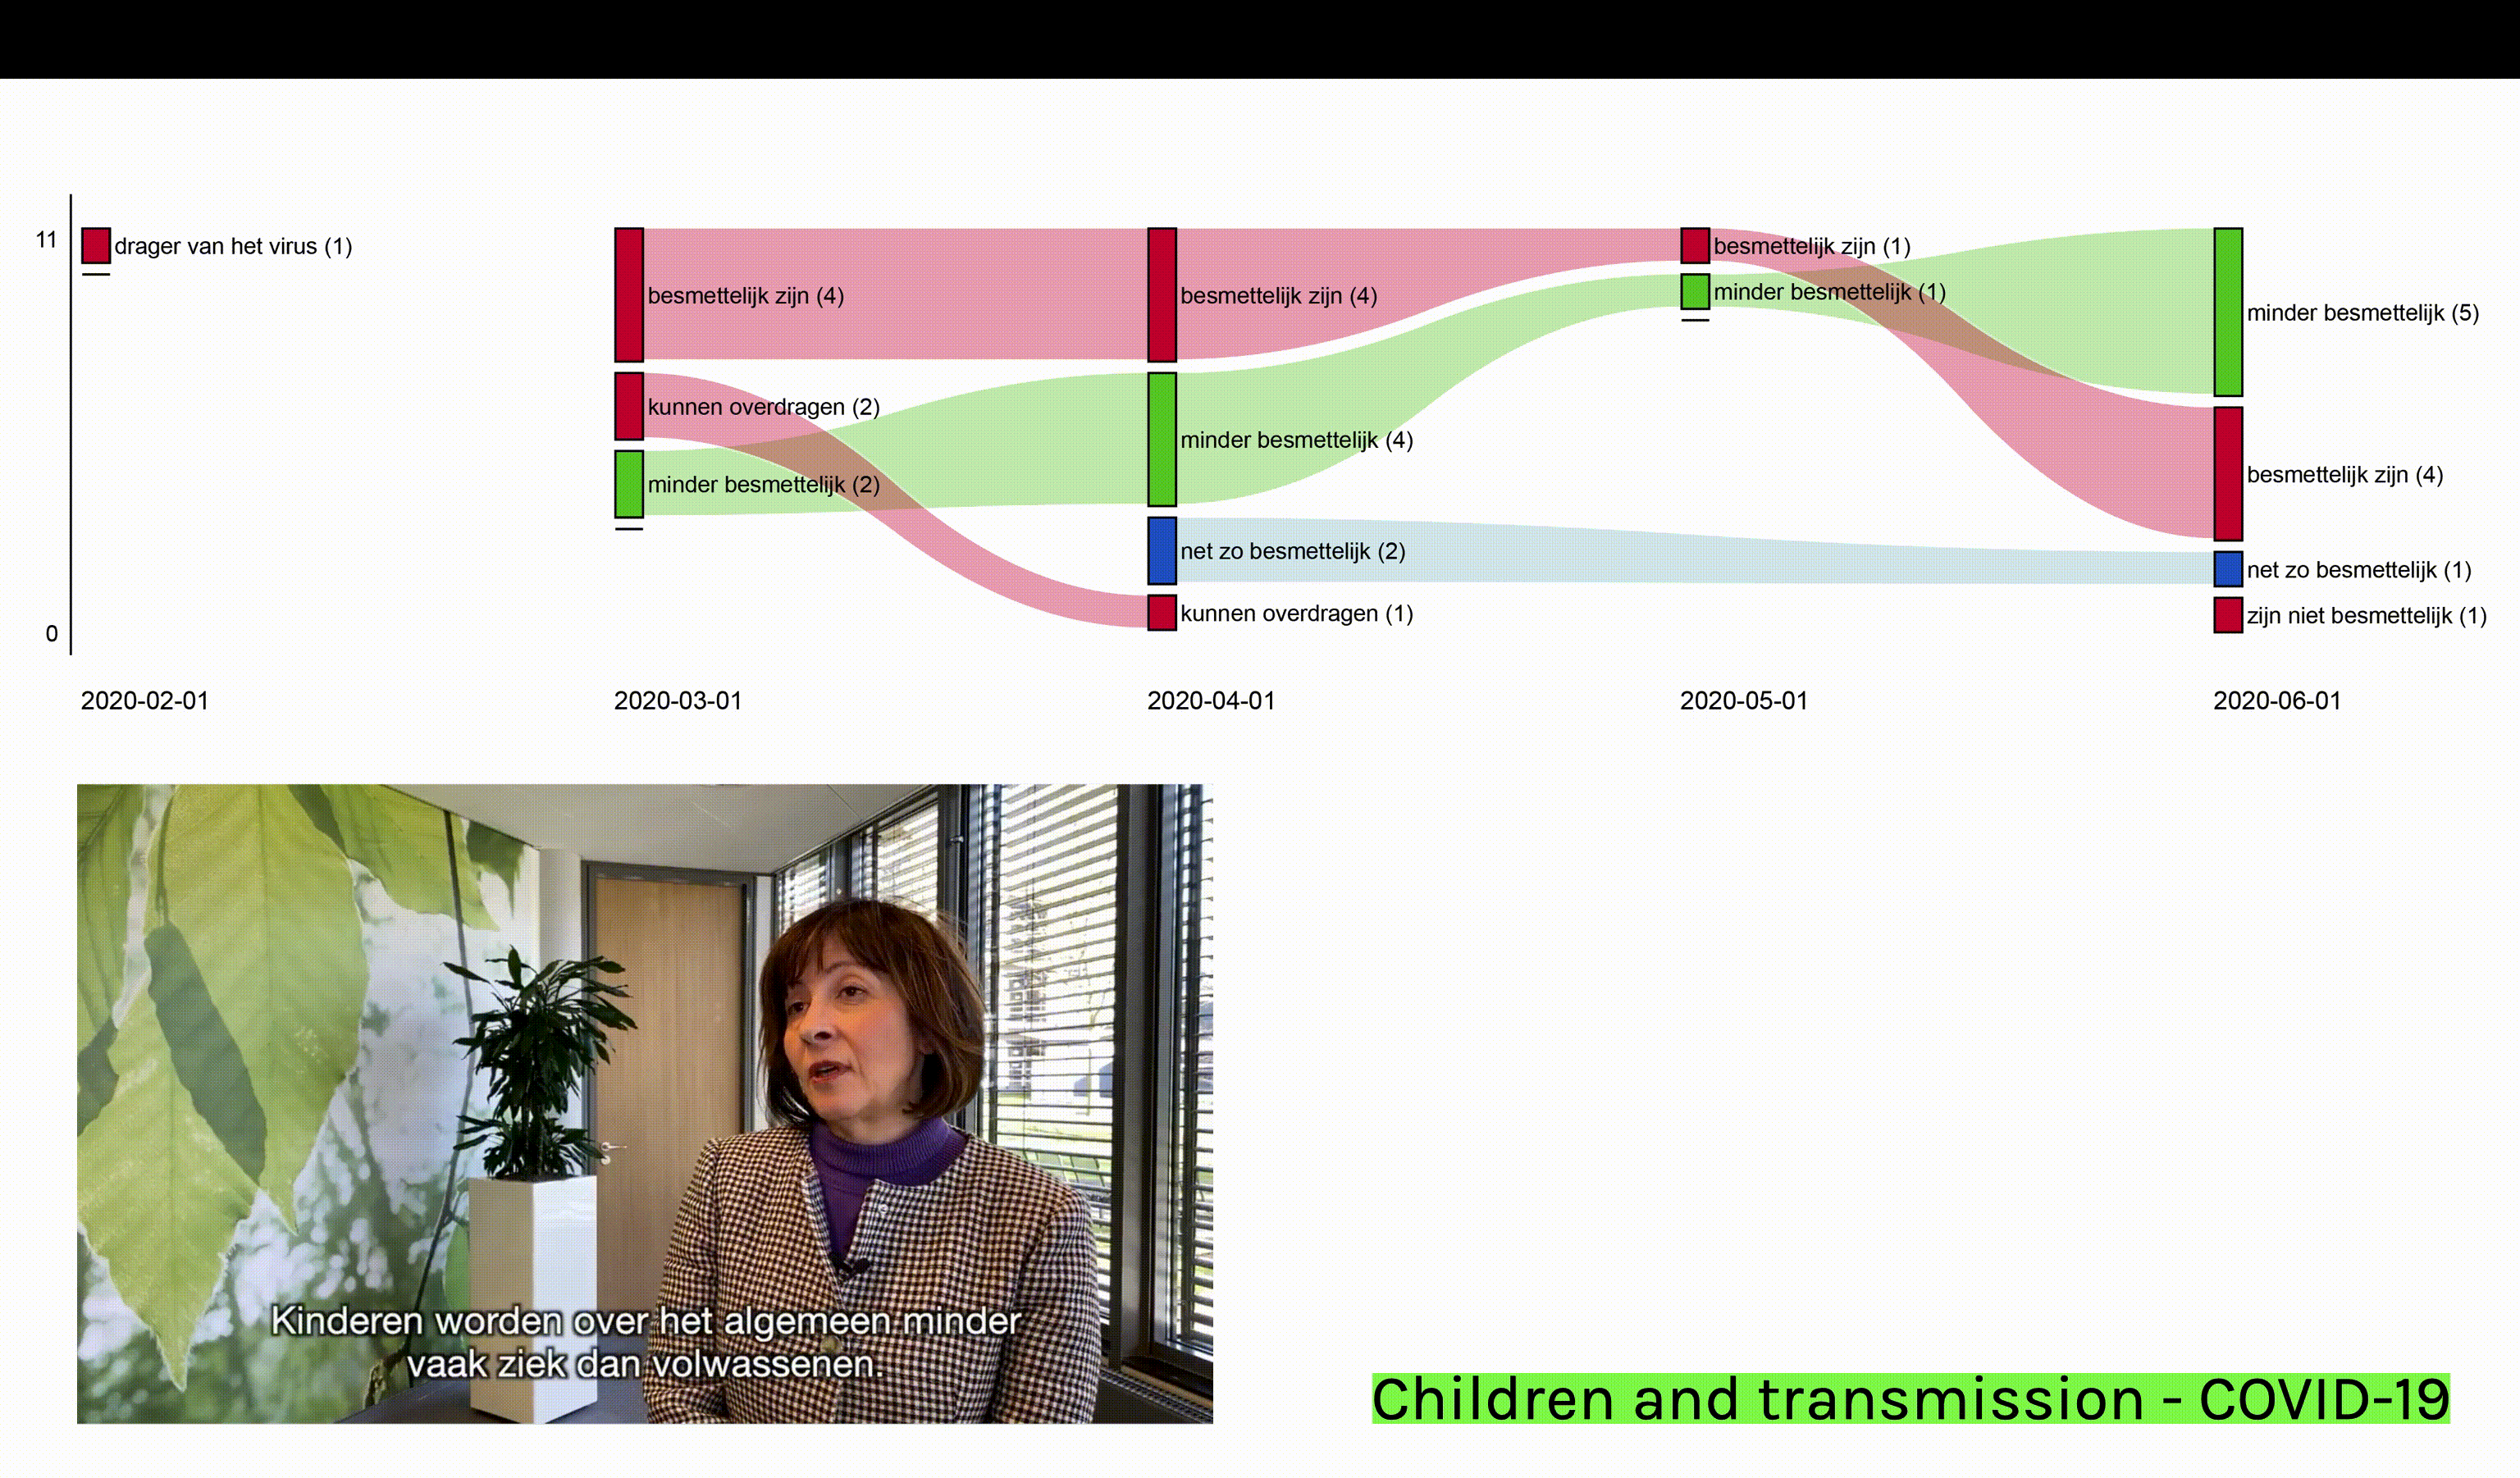 GIF 2. Statements related to children, transmission and COVID-19 (February-June 2020)